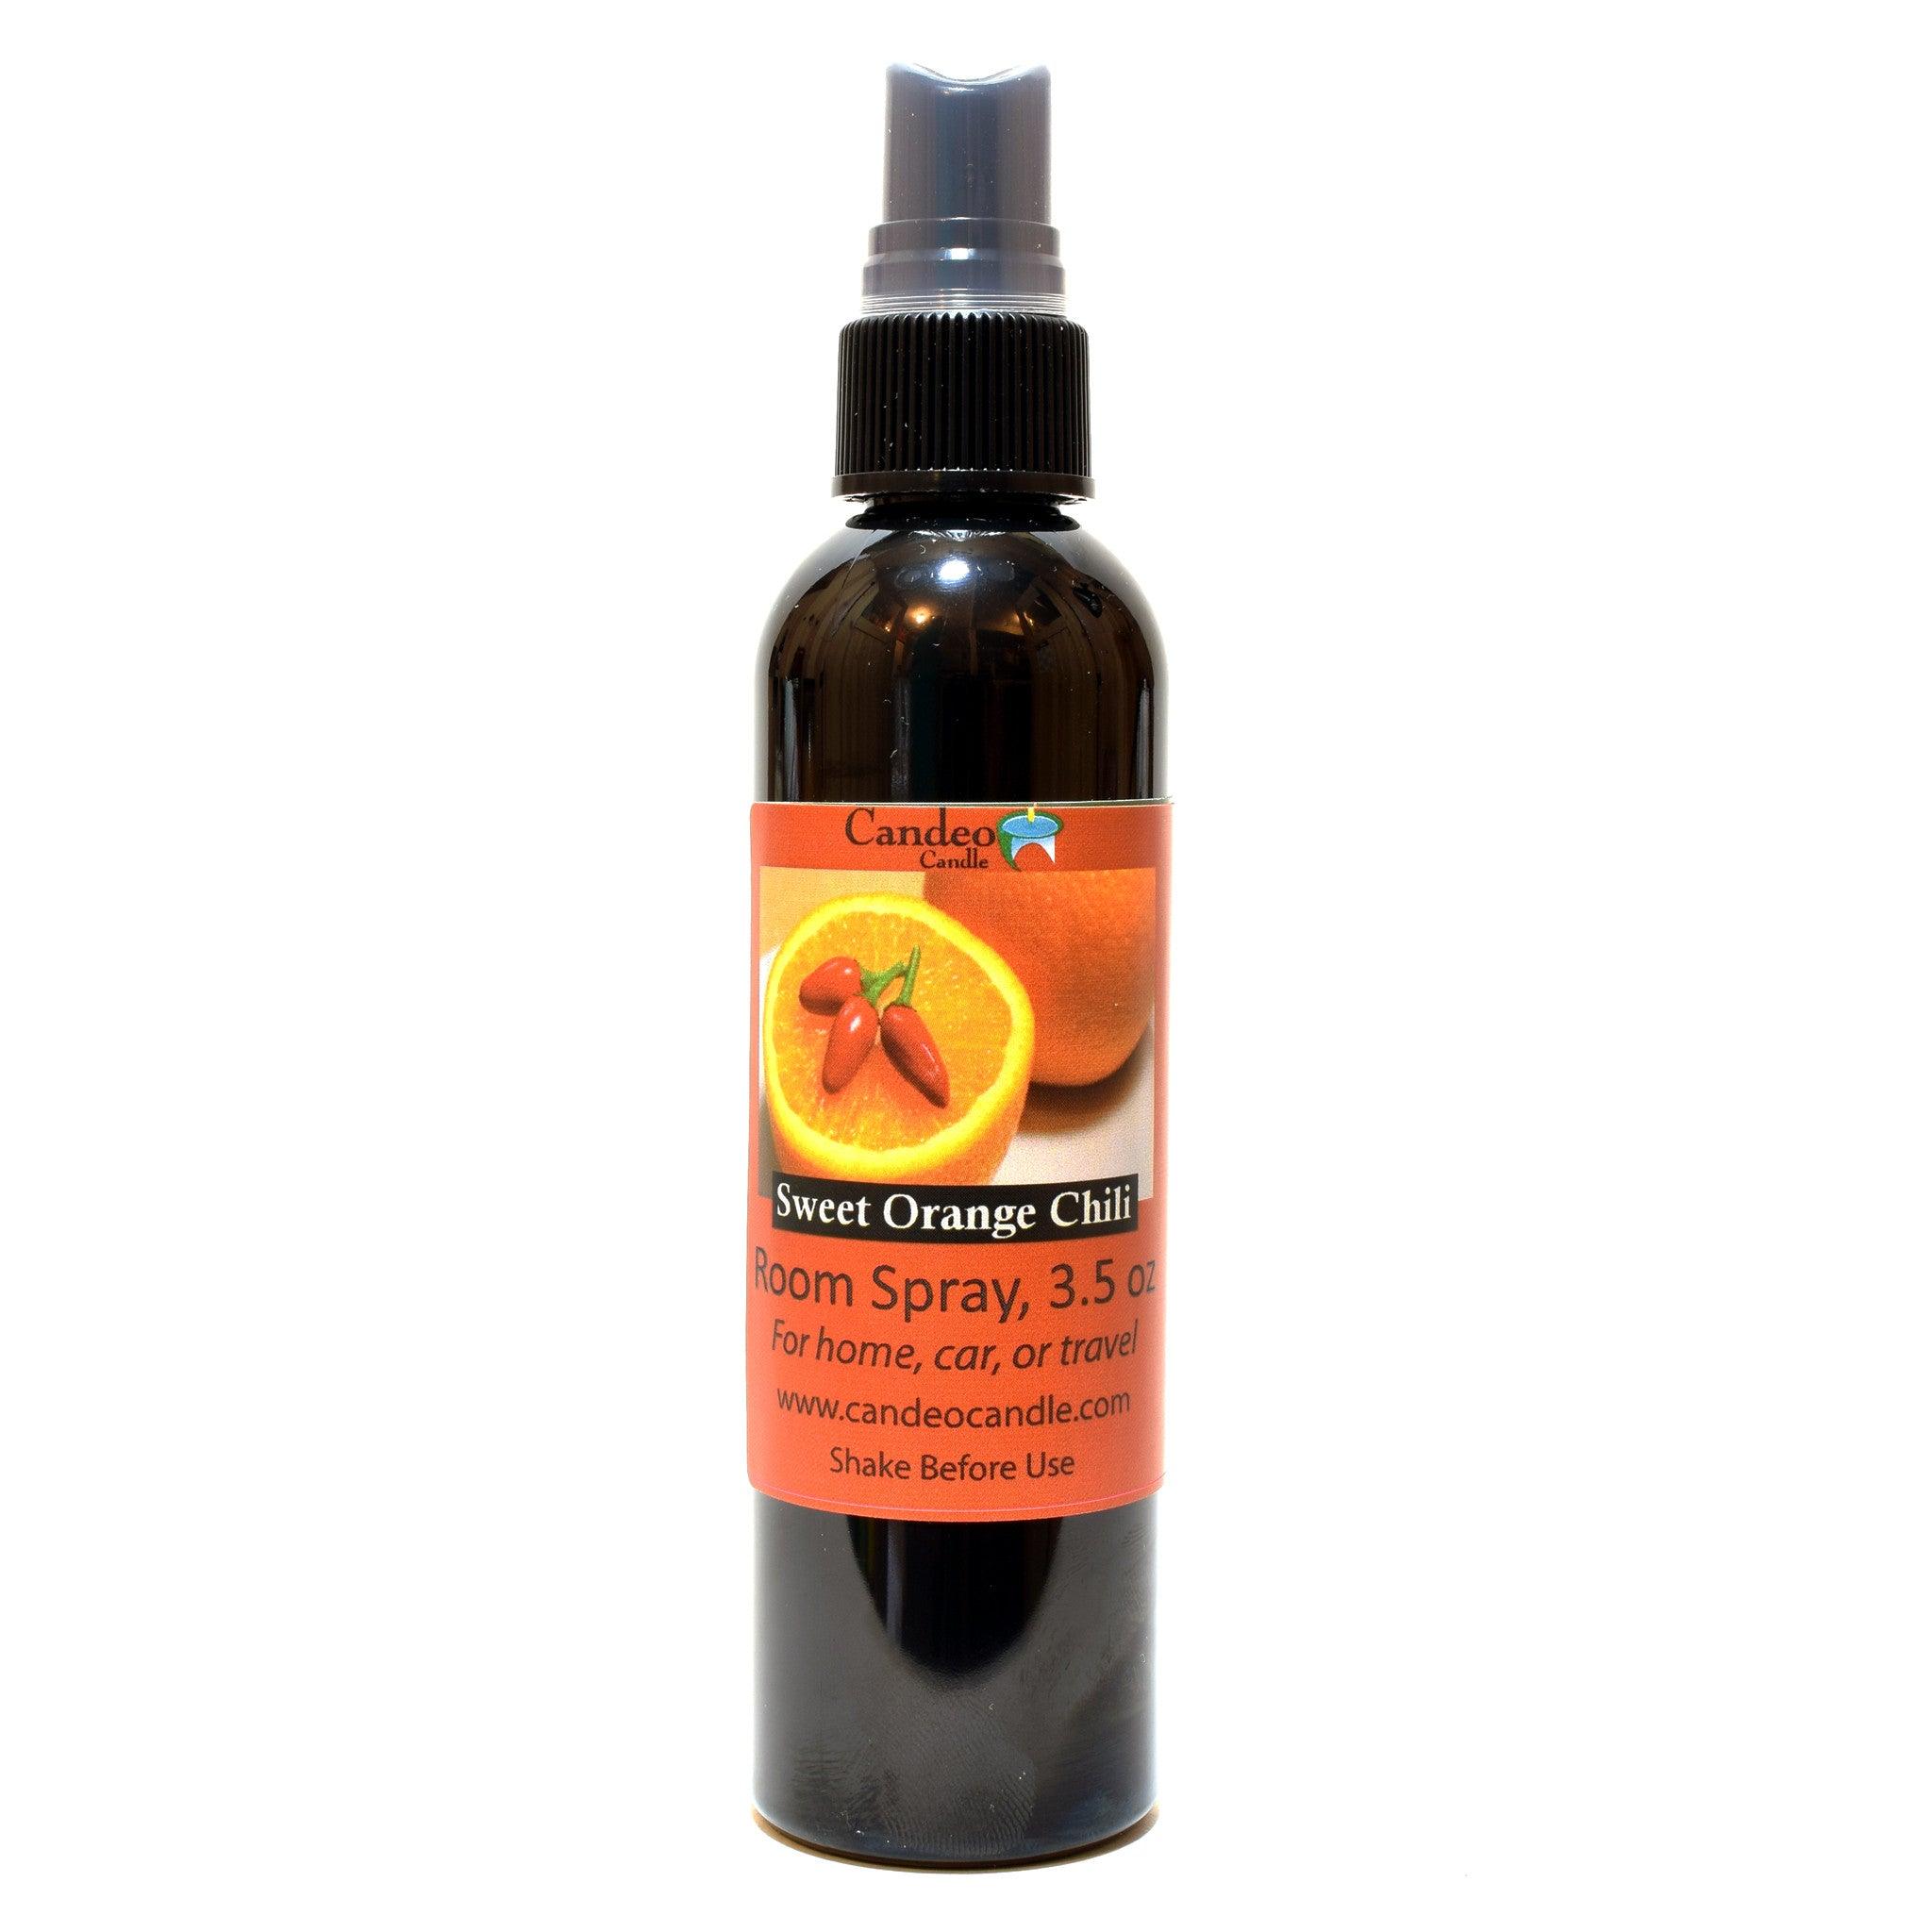 Sweet Orange Chili Pepper, 3.5 oz Room Spray - Candeo Candle